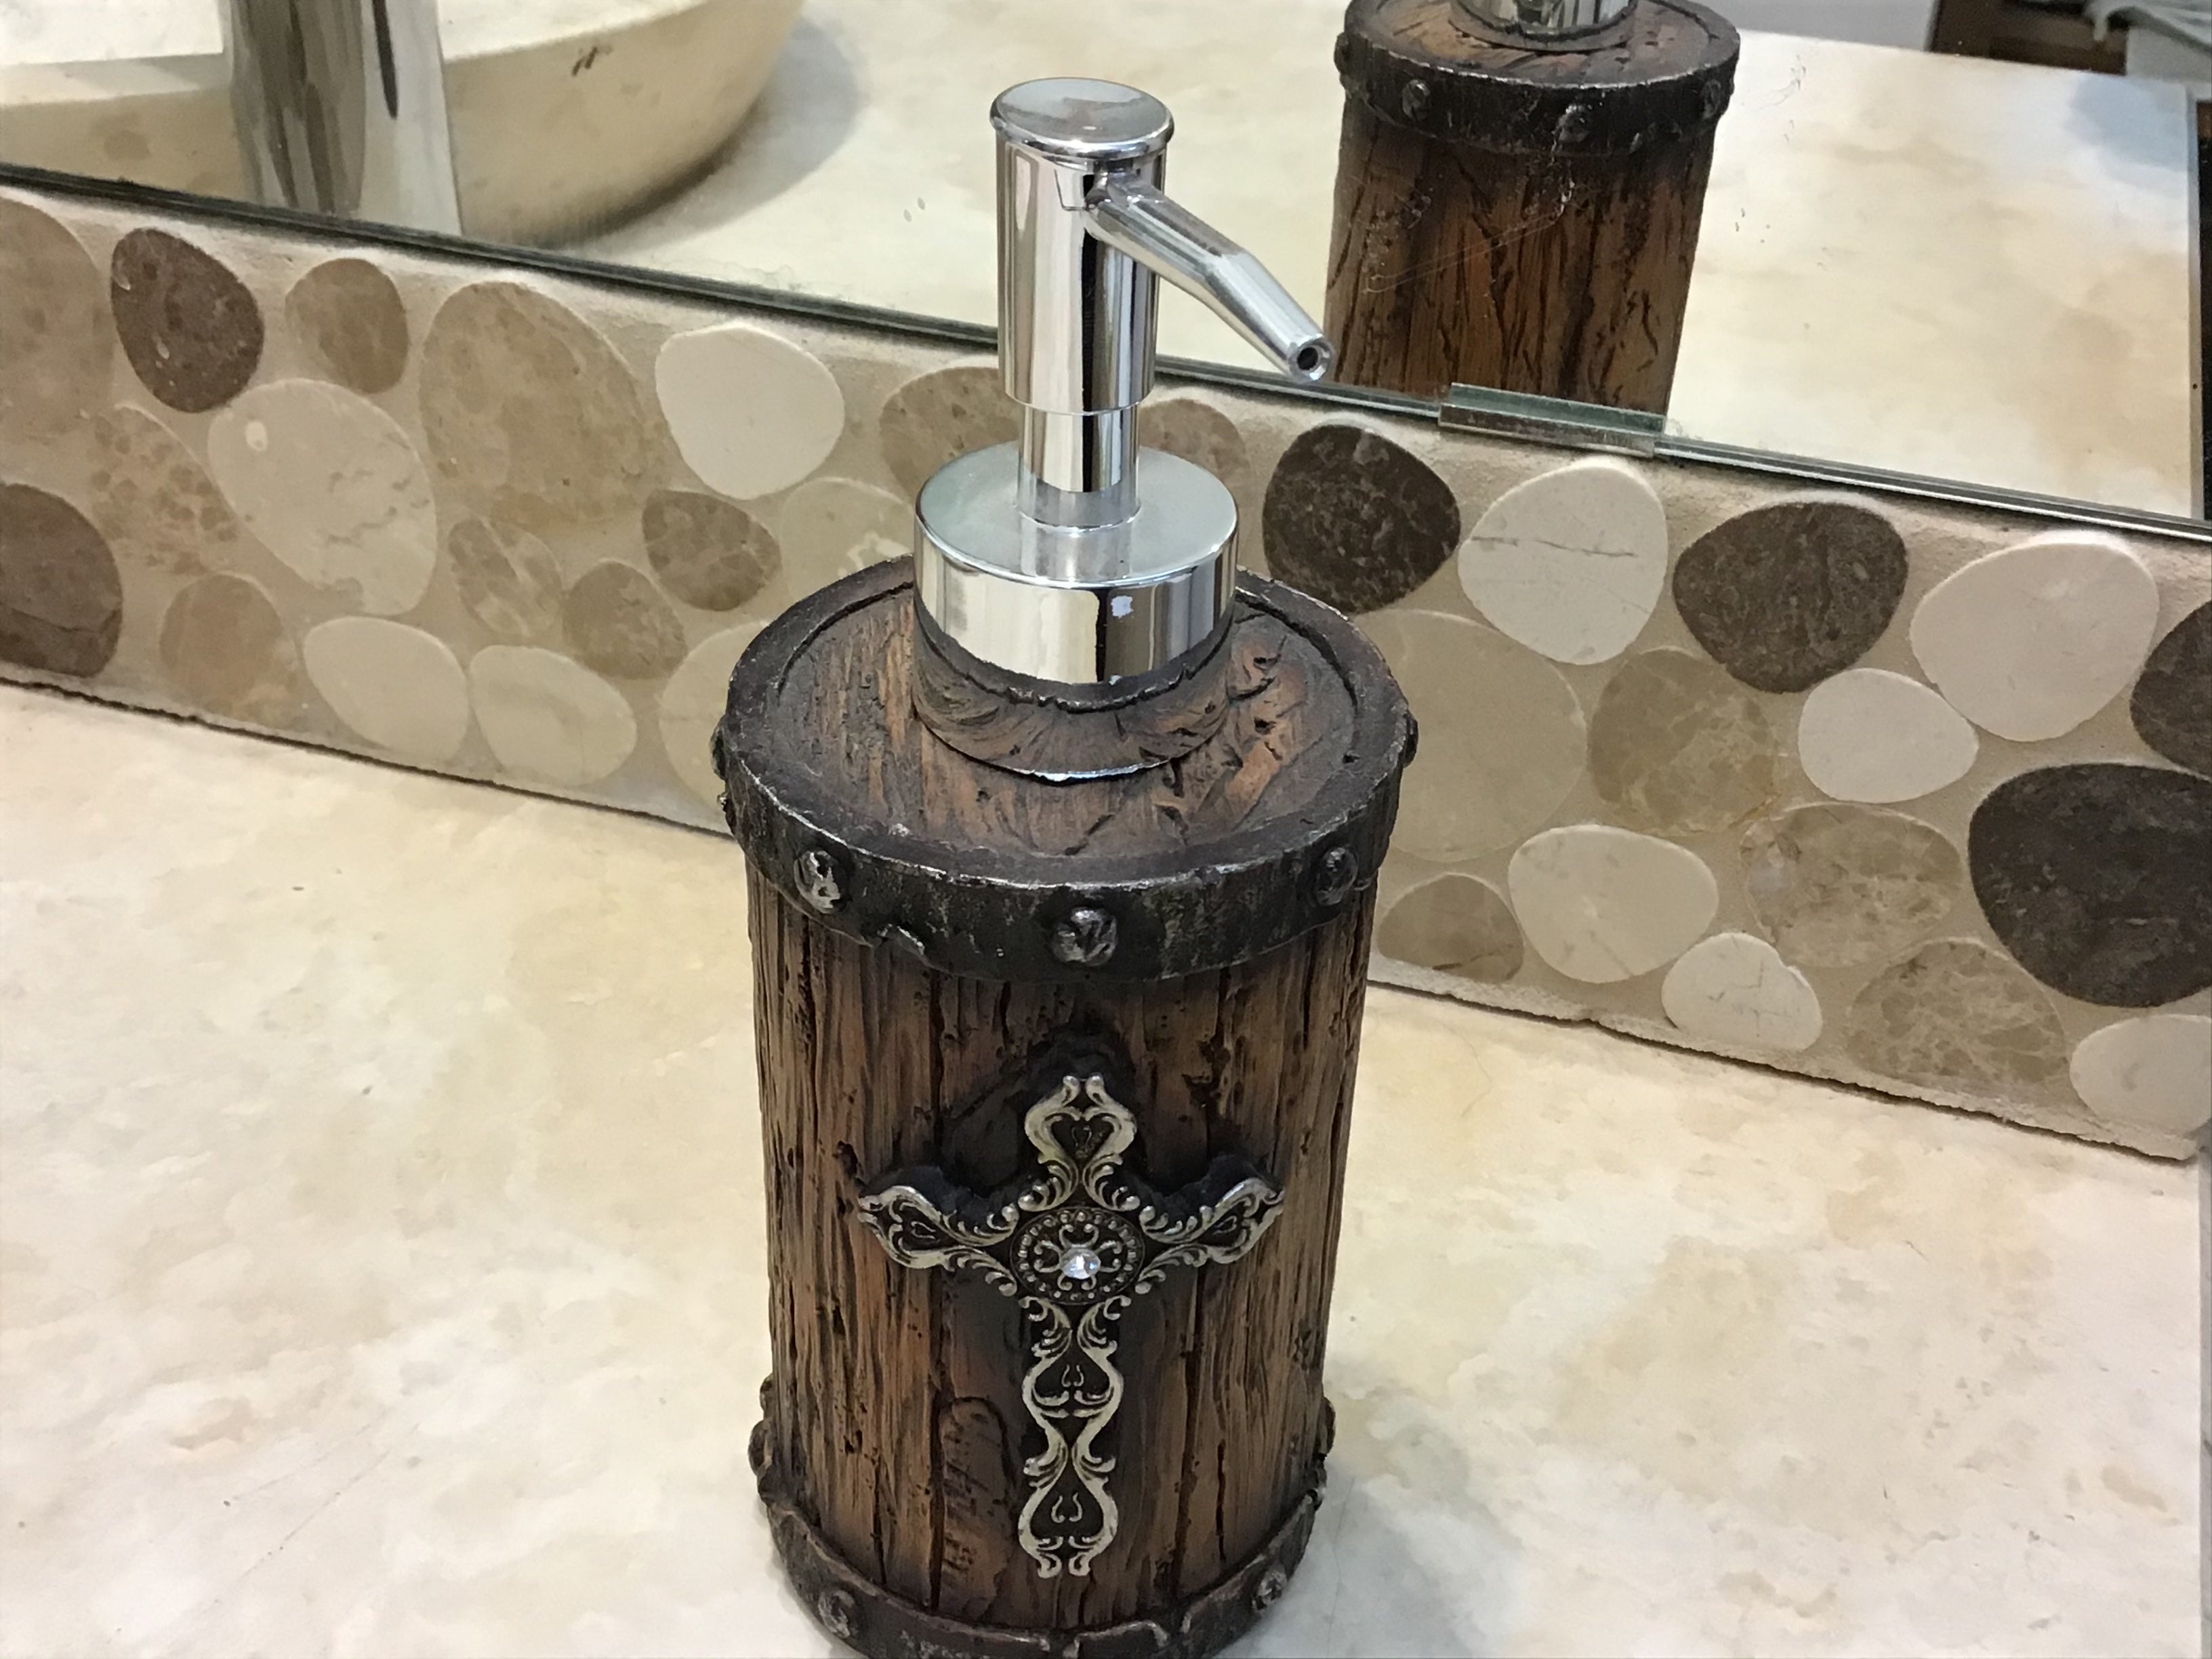 WOOD W/ SILVER CROSS TOILET PAPER HOLDER And soap pump each sold separately